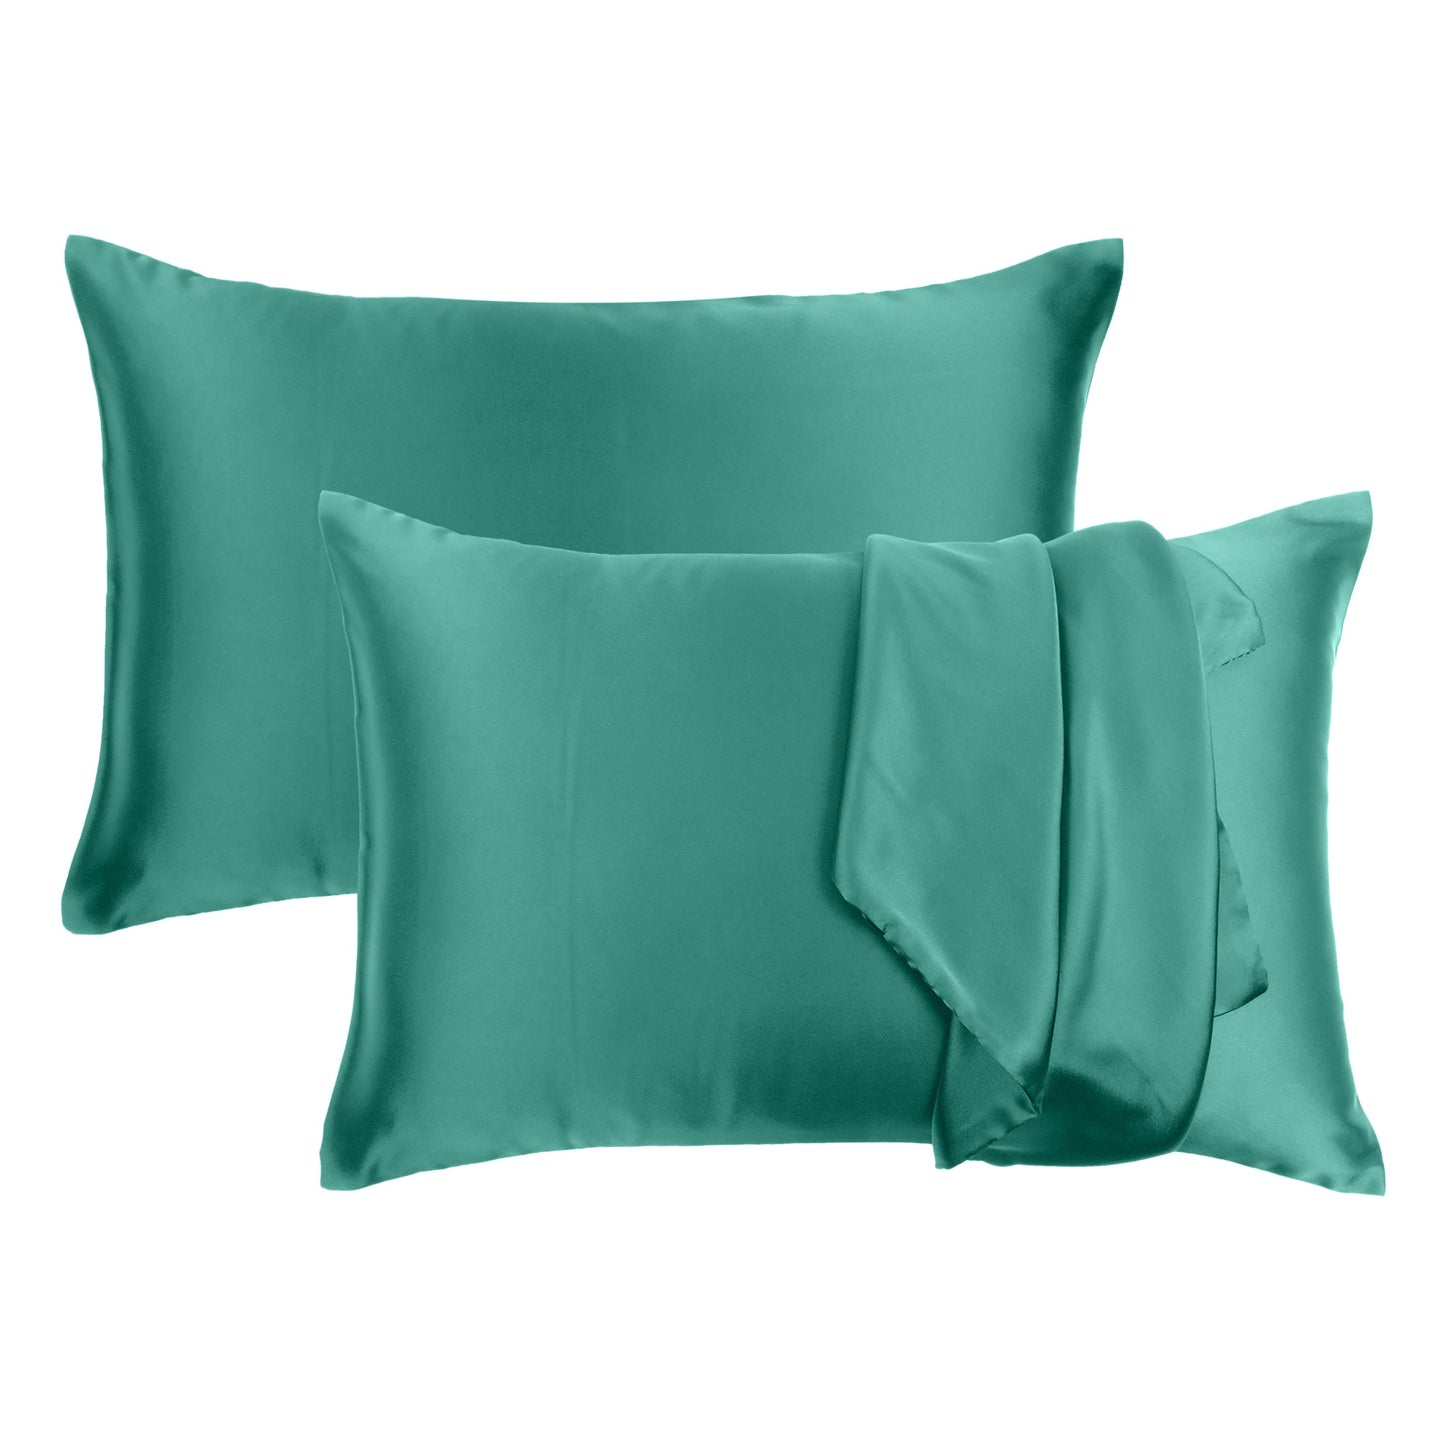 Luxury Soft Plain Satin Silk Pillowcases in Set of 2 - Bayberry Green